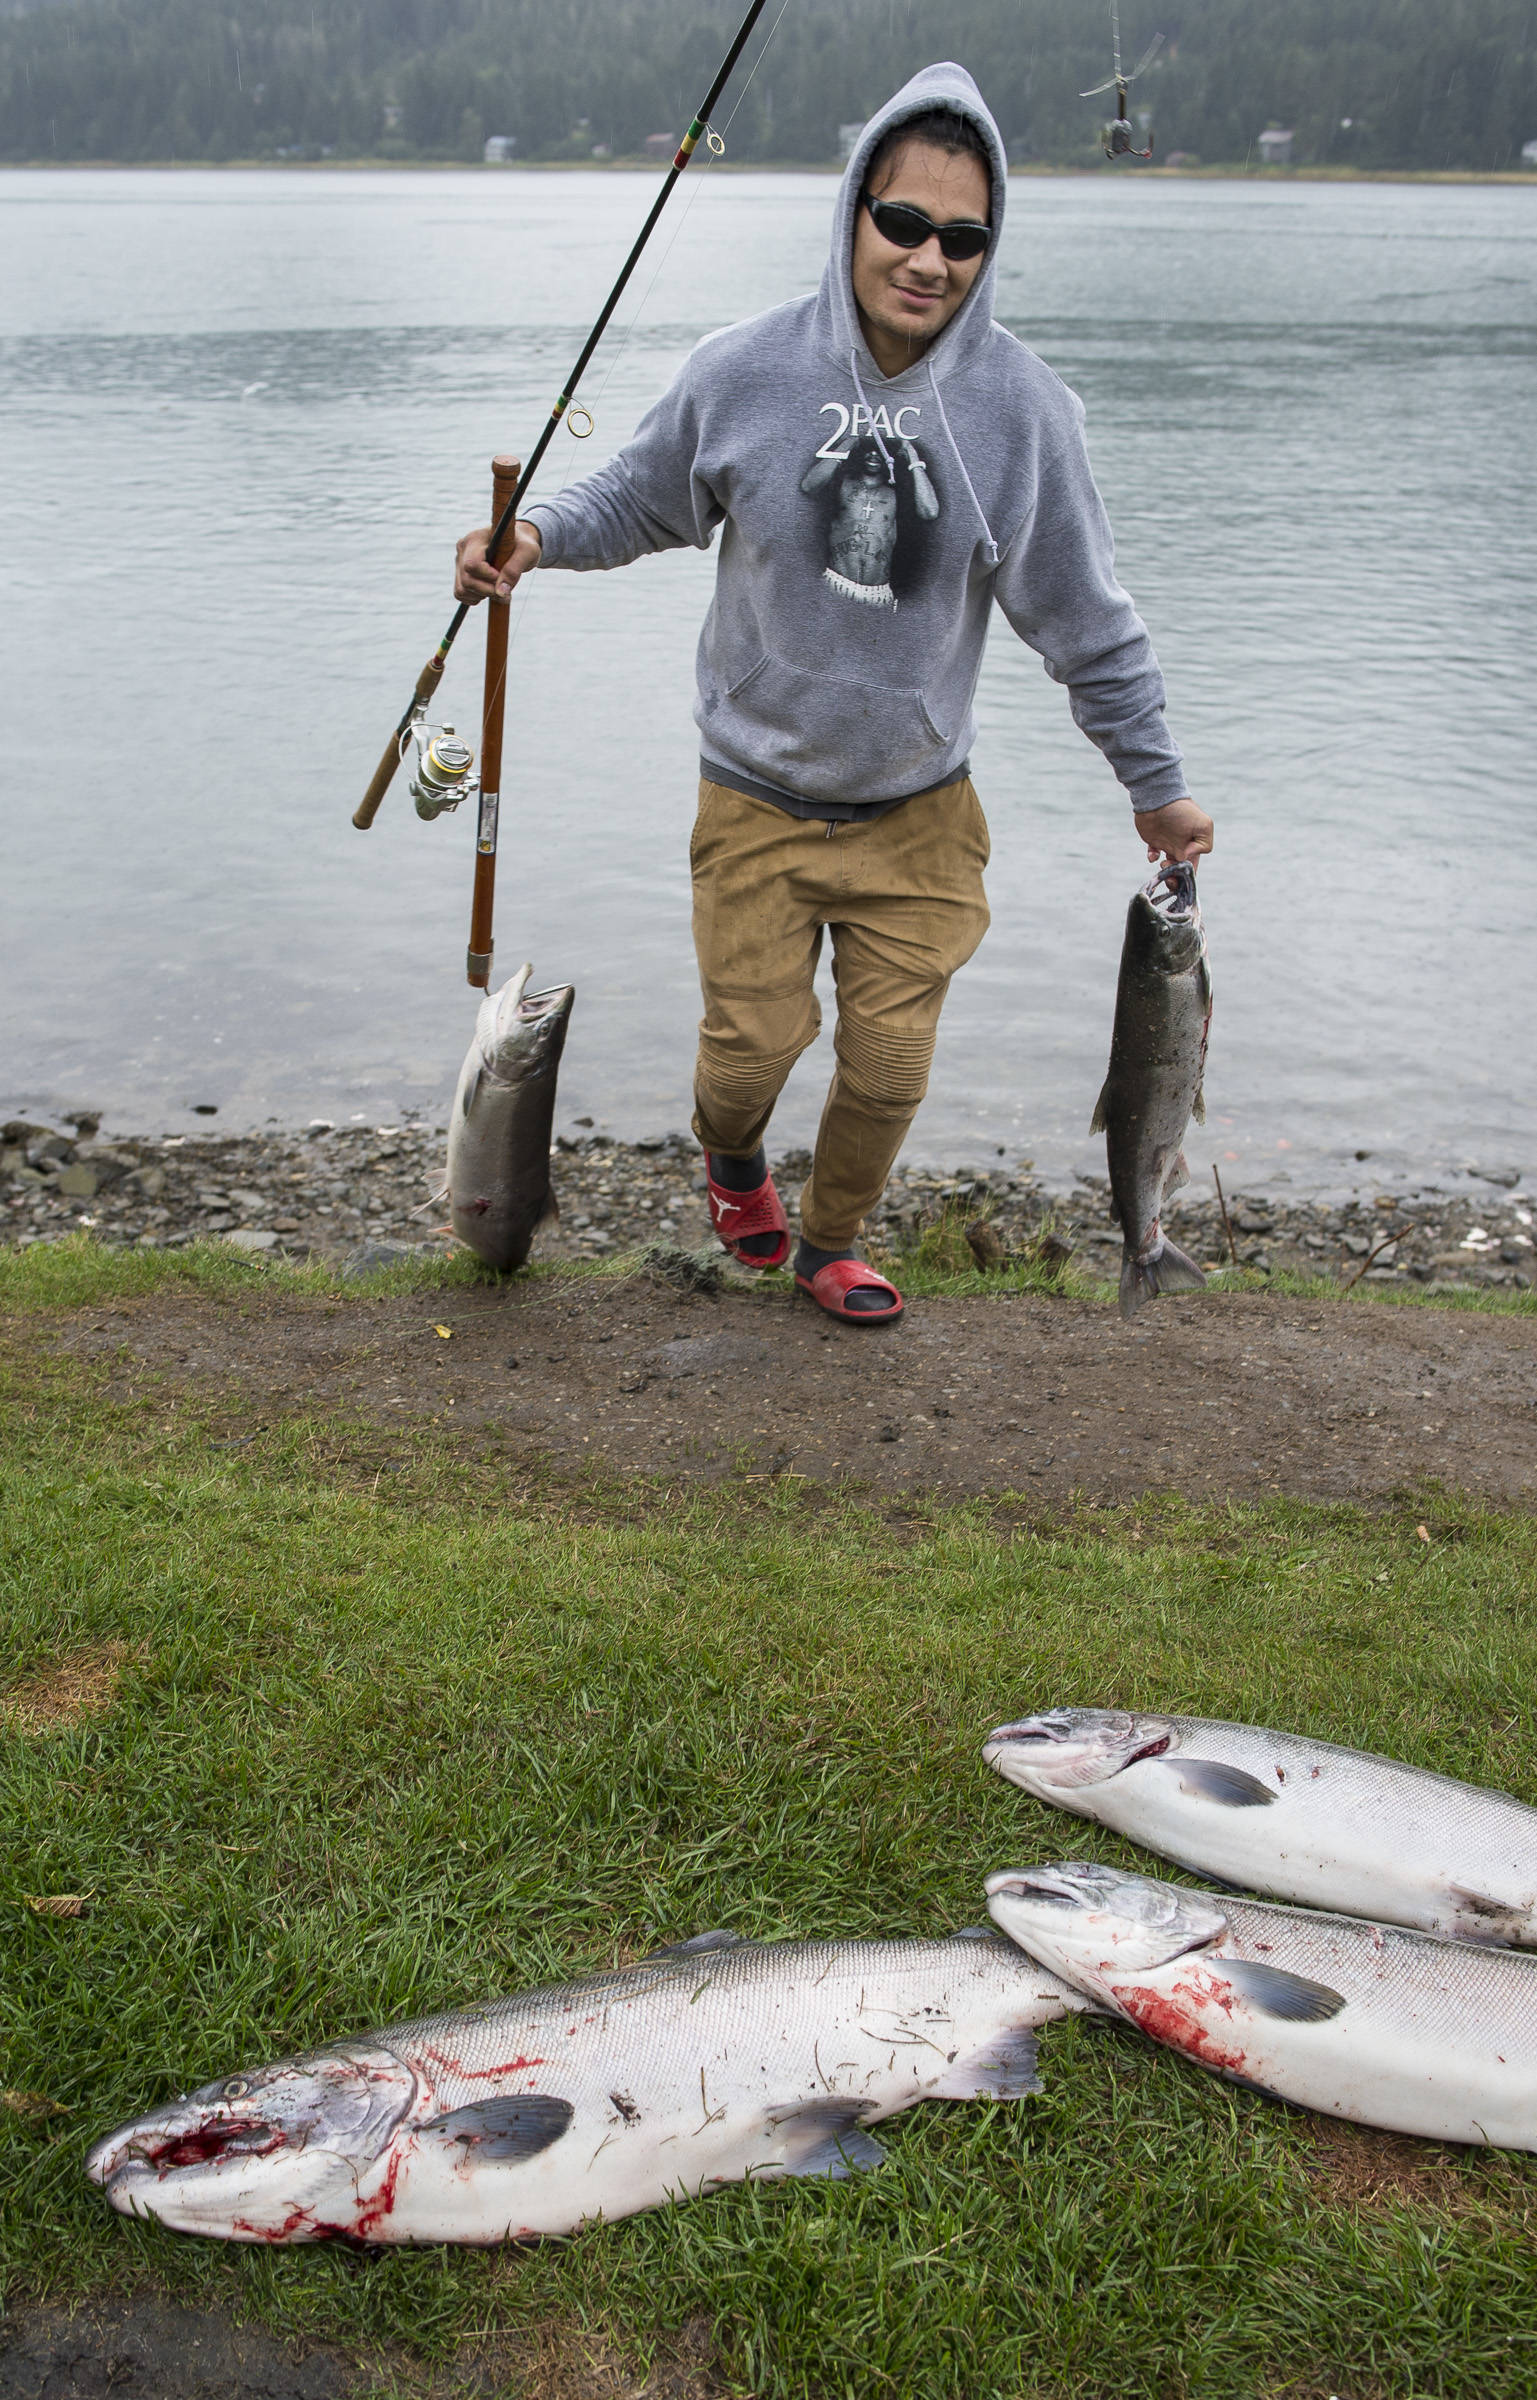 Mamba Tuiqalau hauls up his catch of coho salmon at the Wayside Park on Channel Drive on Friday, Sept. 7, 2018. The Alaska Department of Fish and Game has increased the limit to 12 coho salmon in the designated saltwater hatchery sport harvest area due to the large number of returning hatchery coho salmon in excess of broodstock needs. (Michael Penn | Juneau Empire)